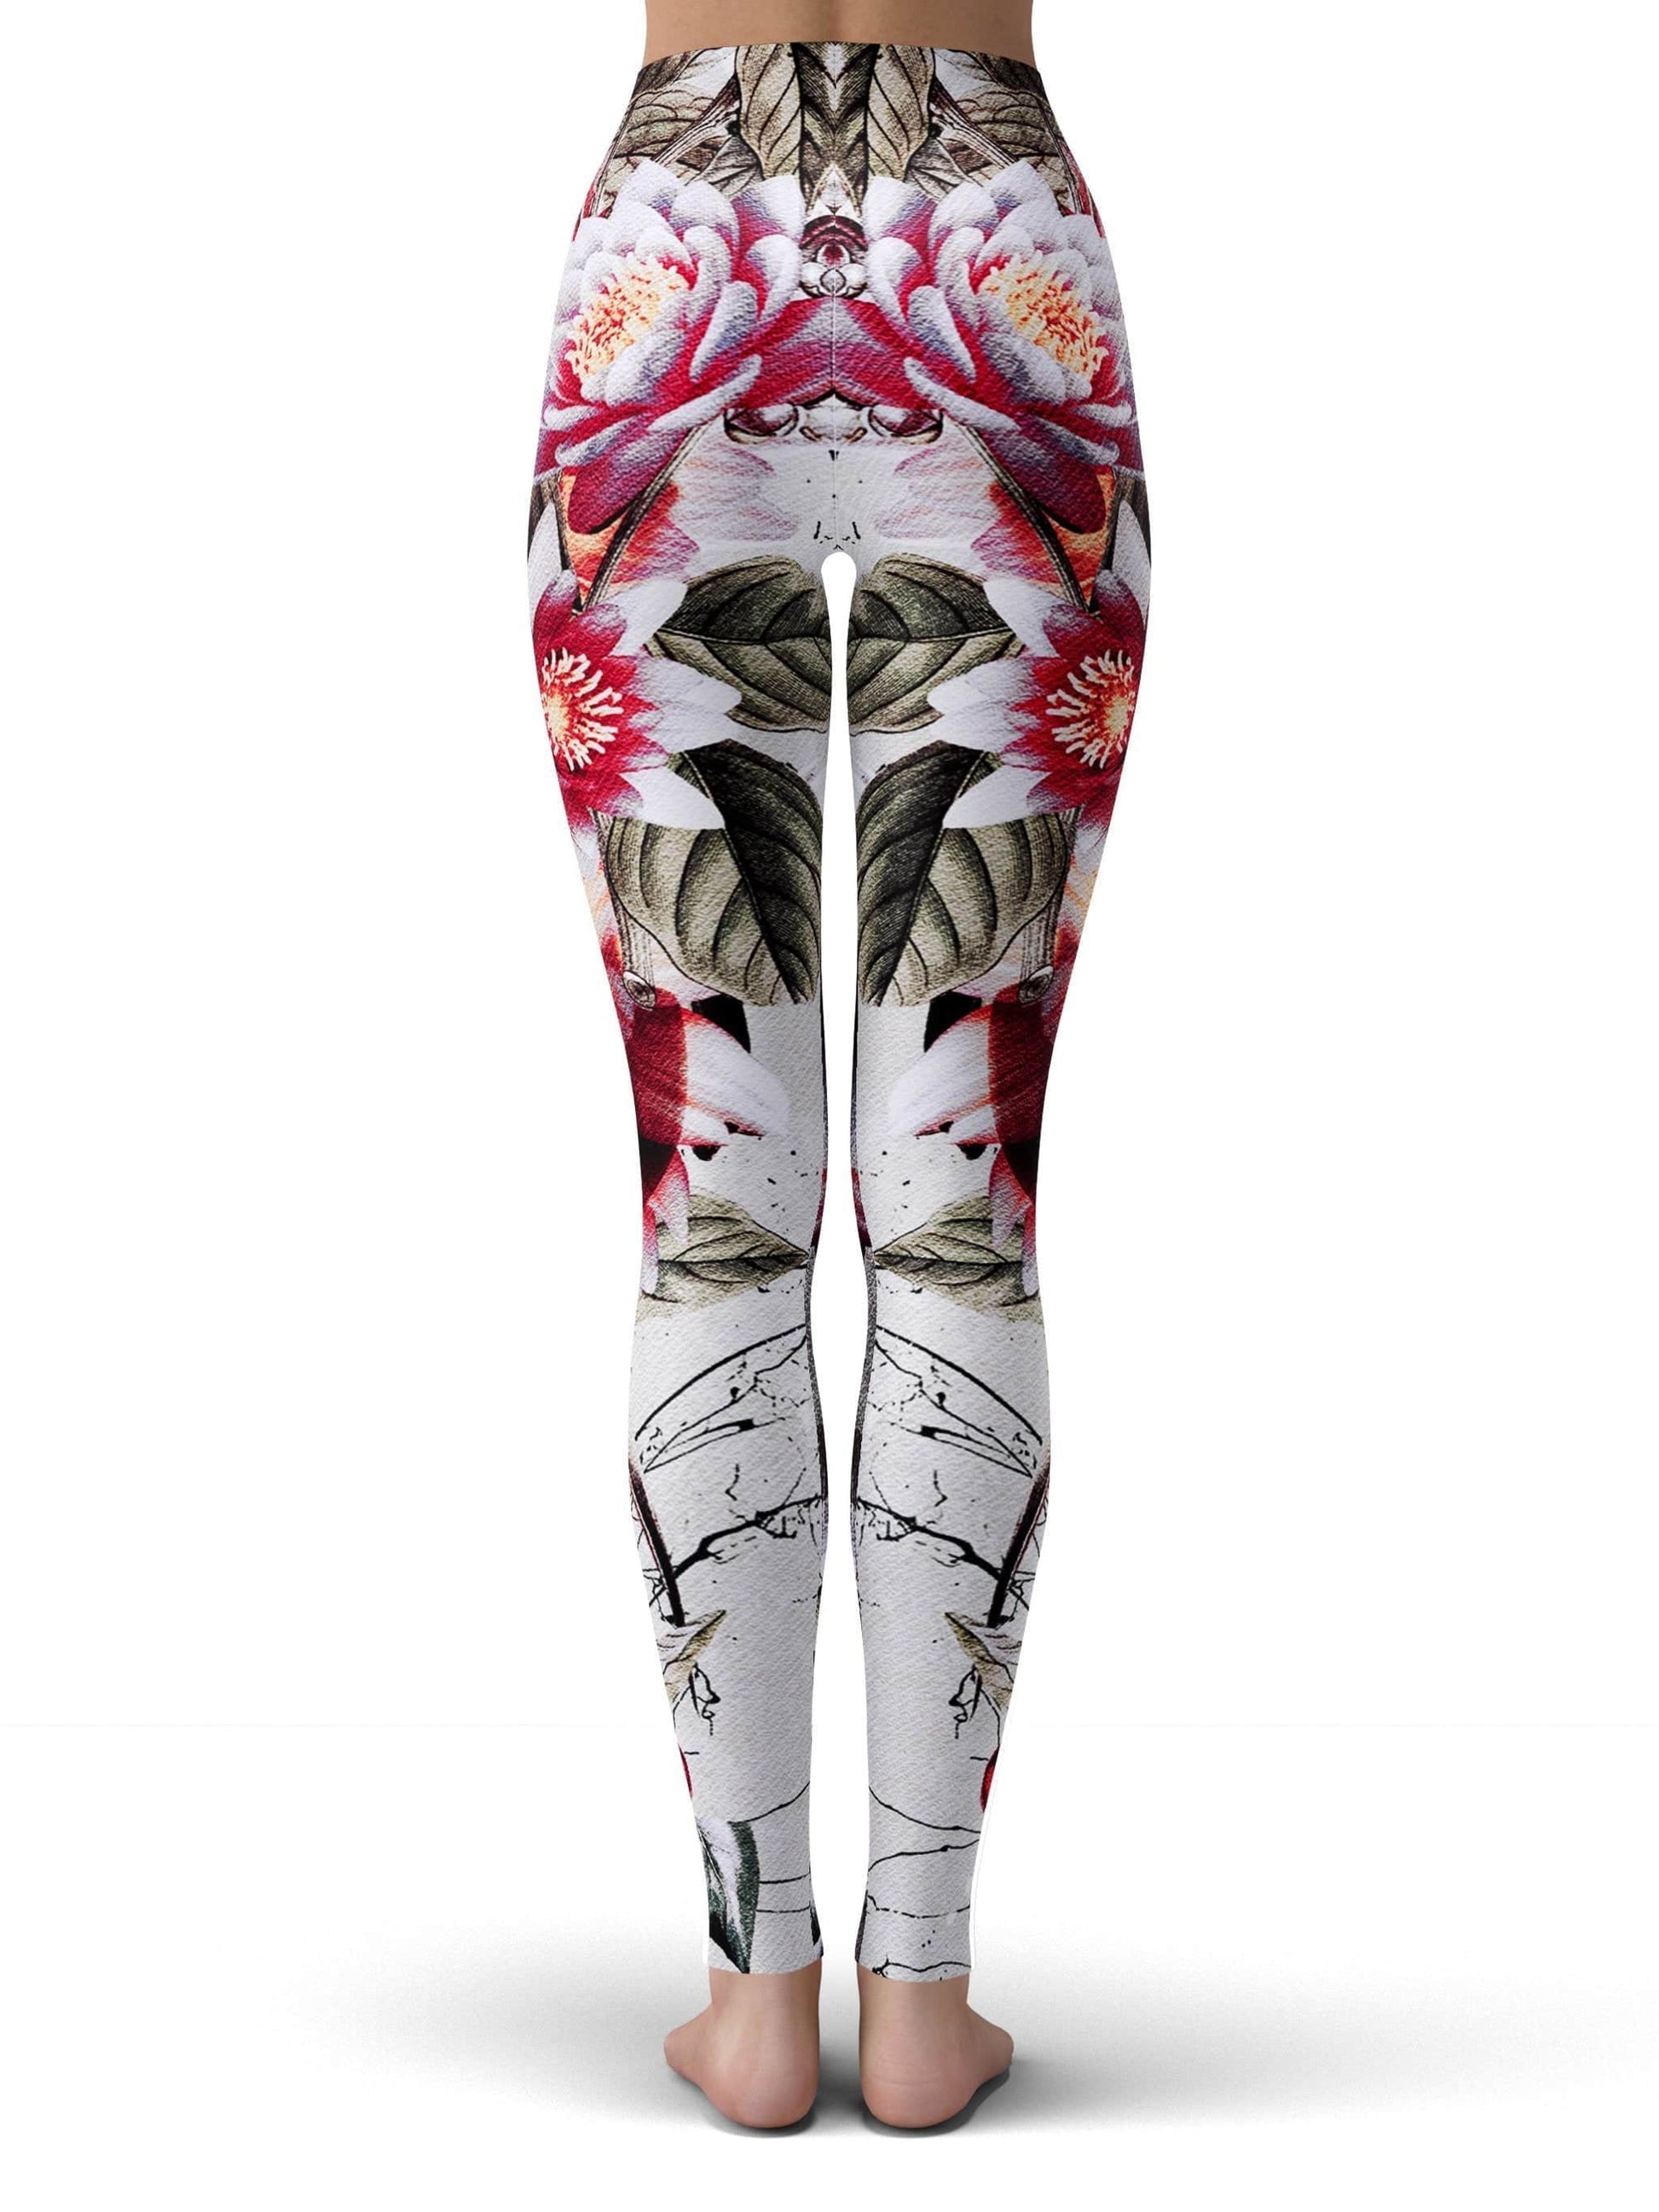 Floral Skull Leggings (Ready To Ship), Ready To Ship, | iEDM